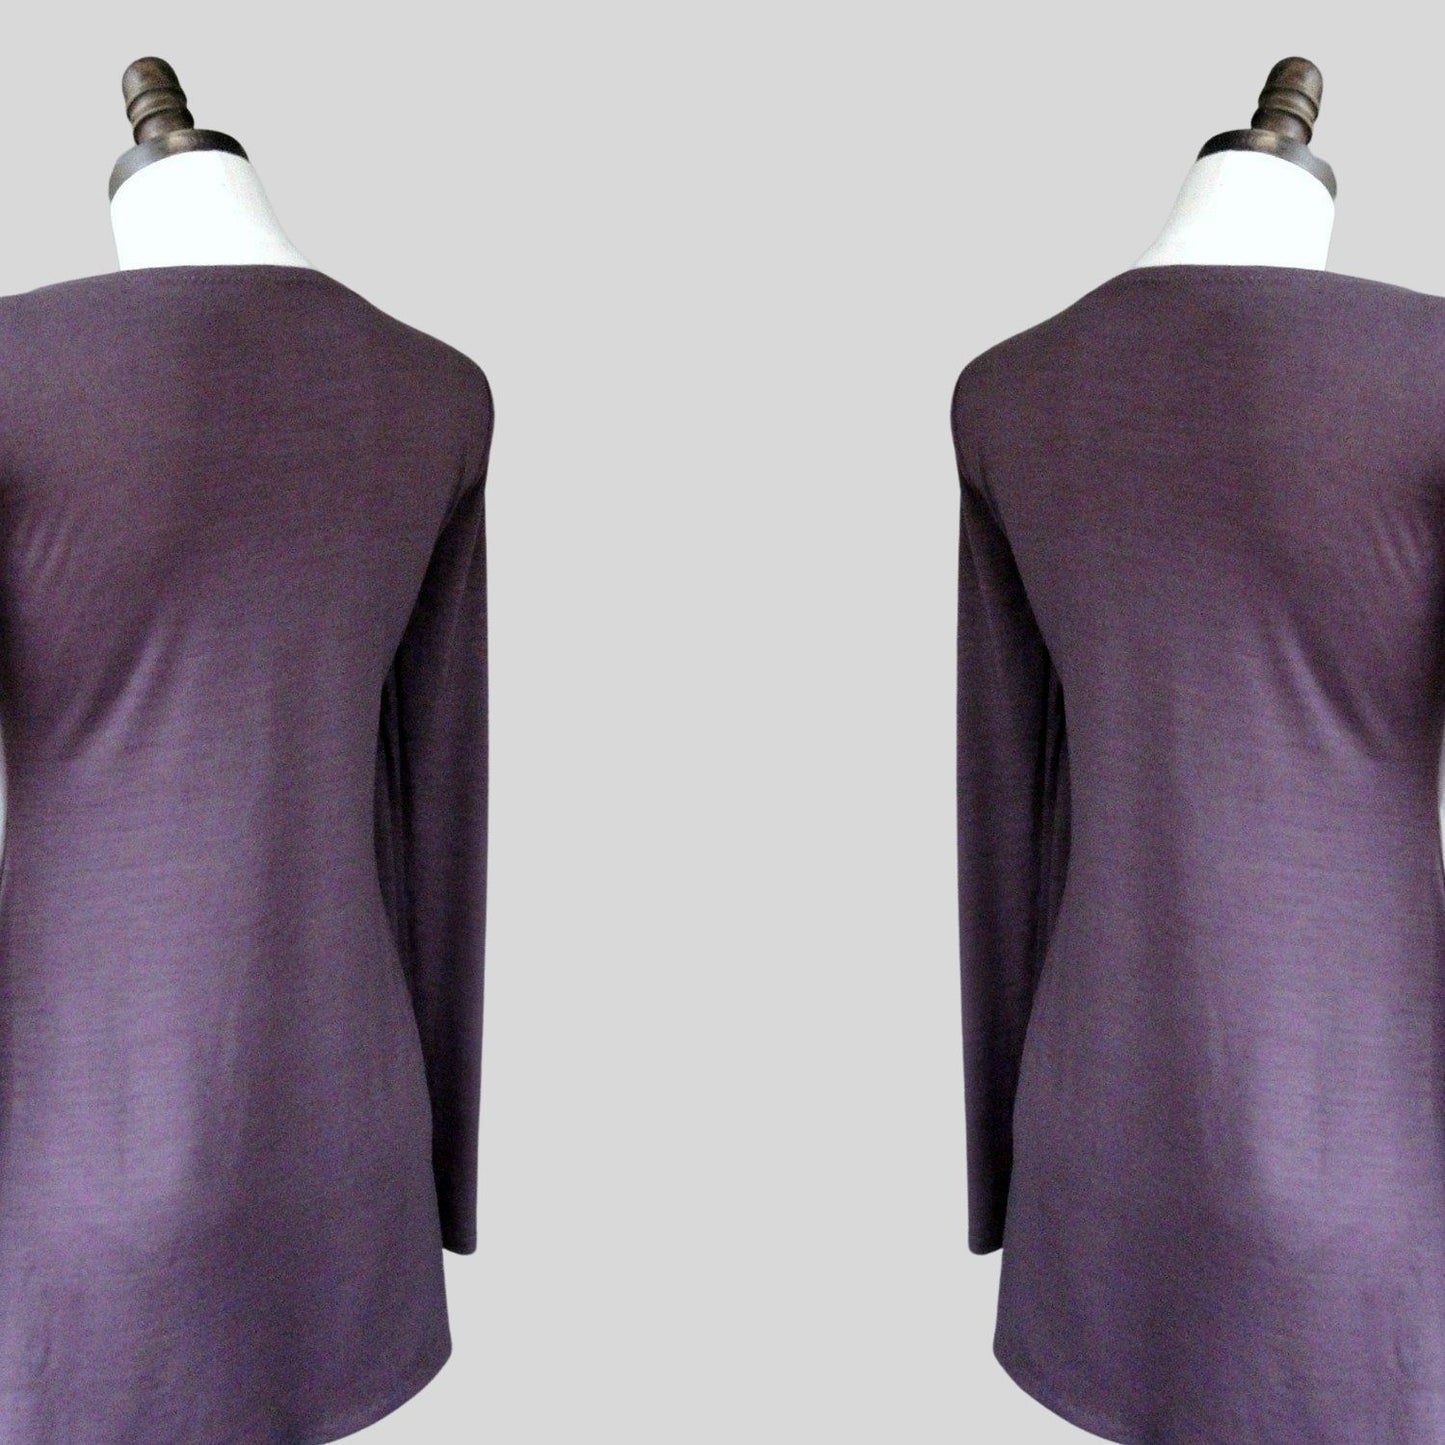 purple Flare wool top | 100% merino wool jersey top | Shop merino wool clothing made in Canada | Women's organic clothes store | Econica